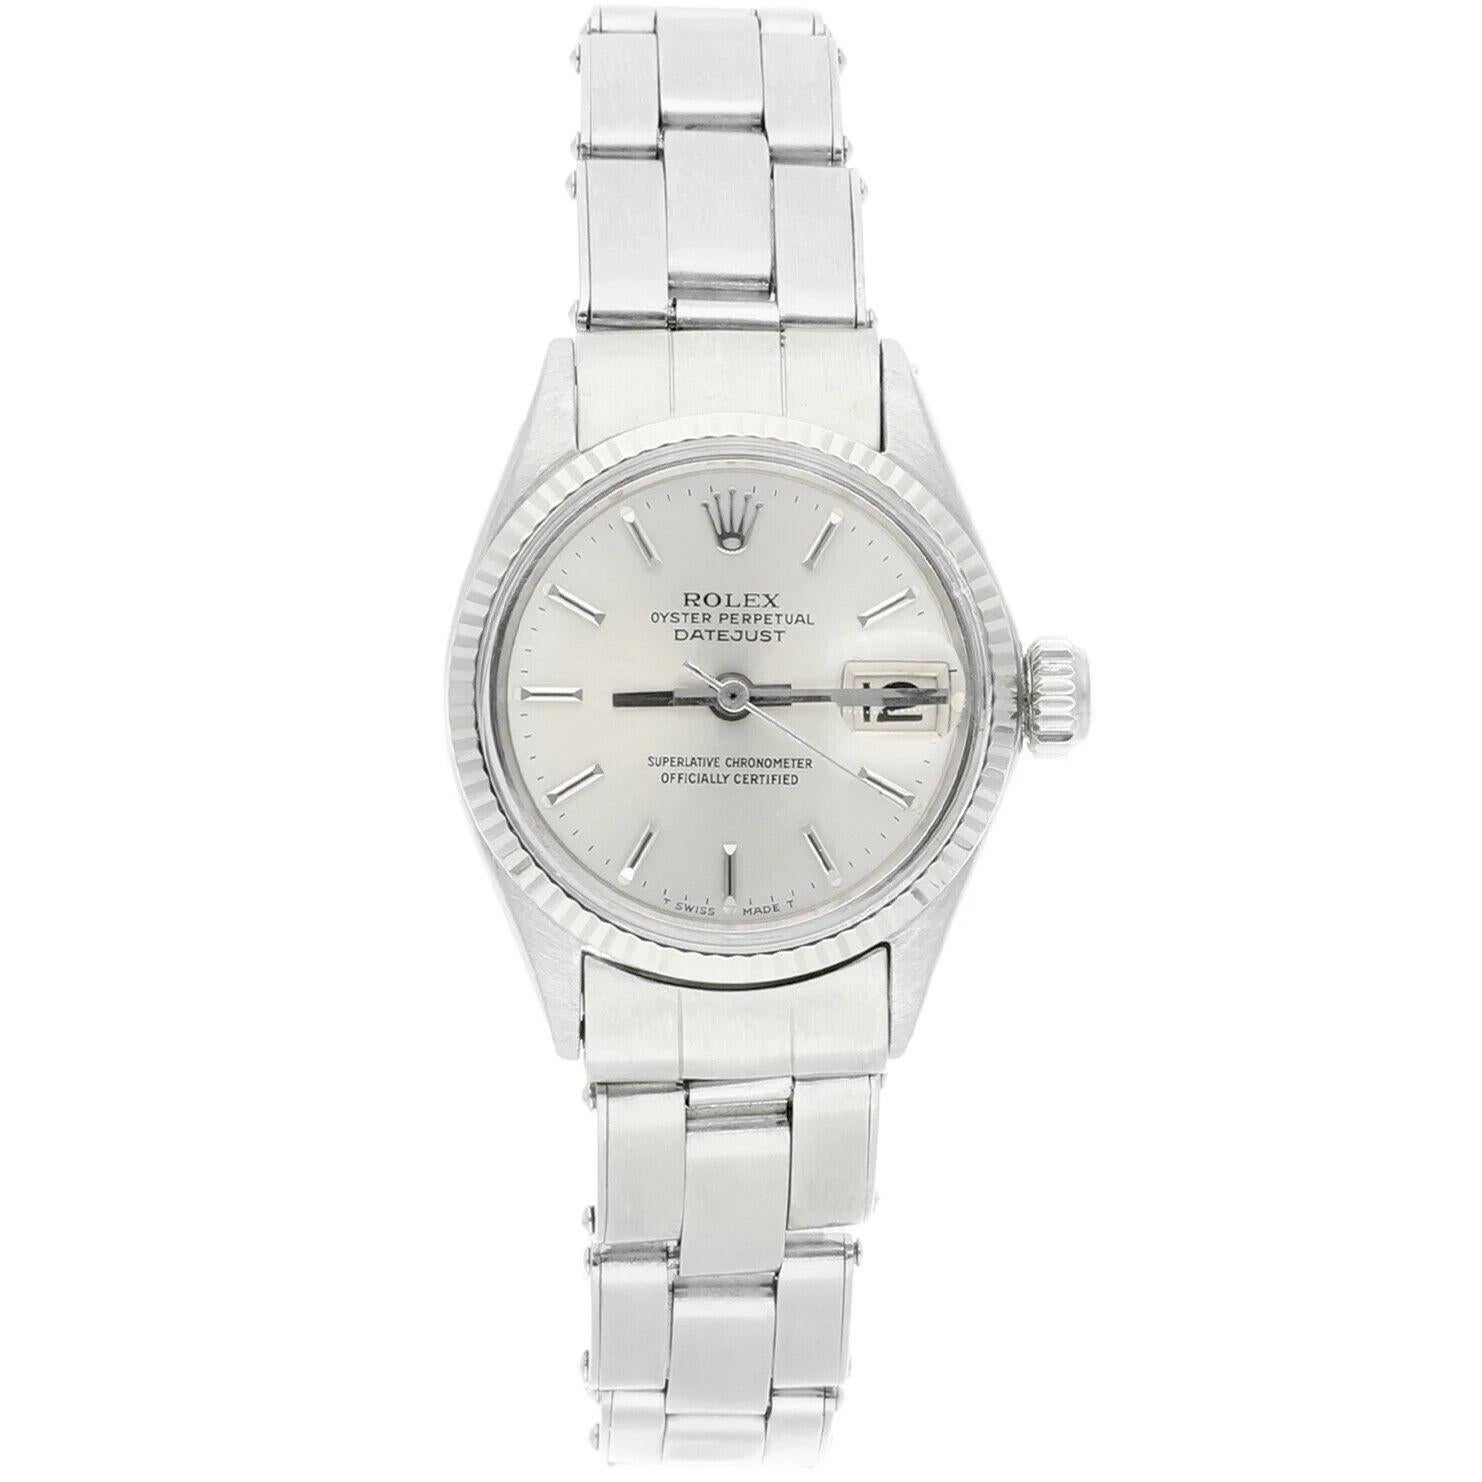 Vintage Rolex Lady Datejust 6517 Stainless Steel Silver Dial 26mm Oyster Band, Circa 1957.
This watch has been professionally polished and is in good overall condition. Authenticity of the watch is guaranteed! Sale is covered by our in-house 1 year